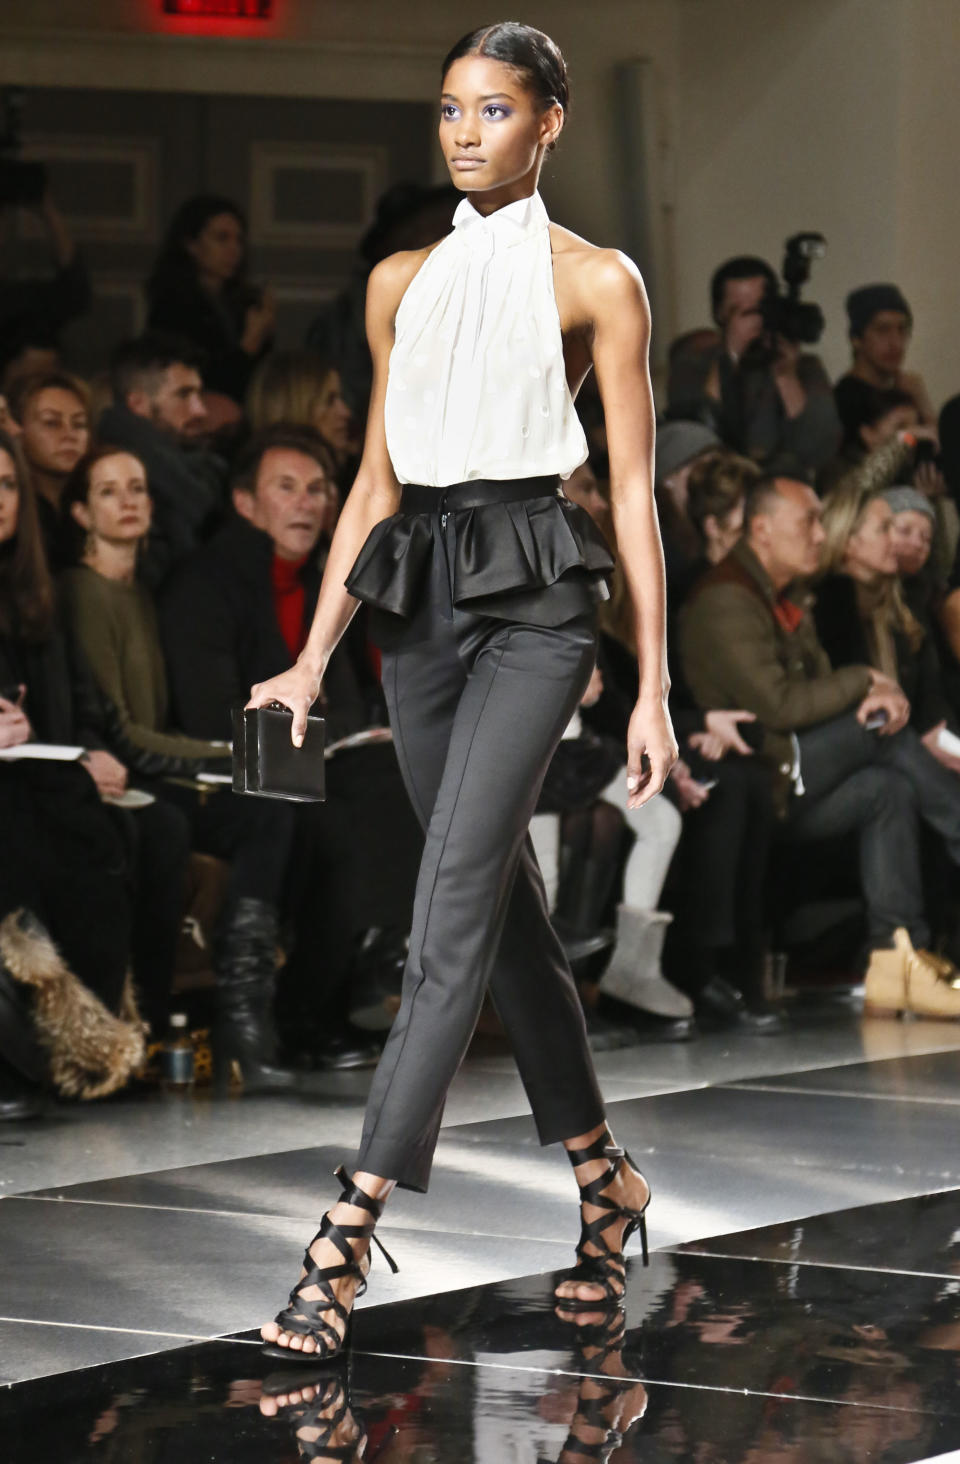 Fashion from the Fall 2013 collection of Jason Wu is modeled on Friday, Feb. 8, 2013 in New York. (AP Photo/Bebeto Matthews)